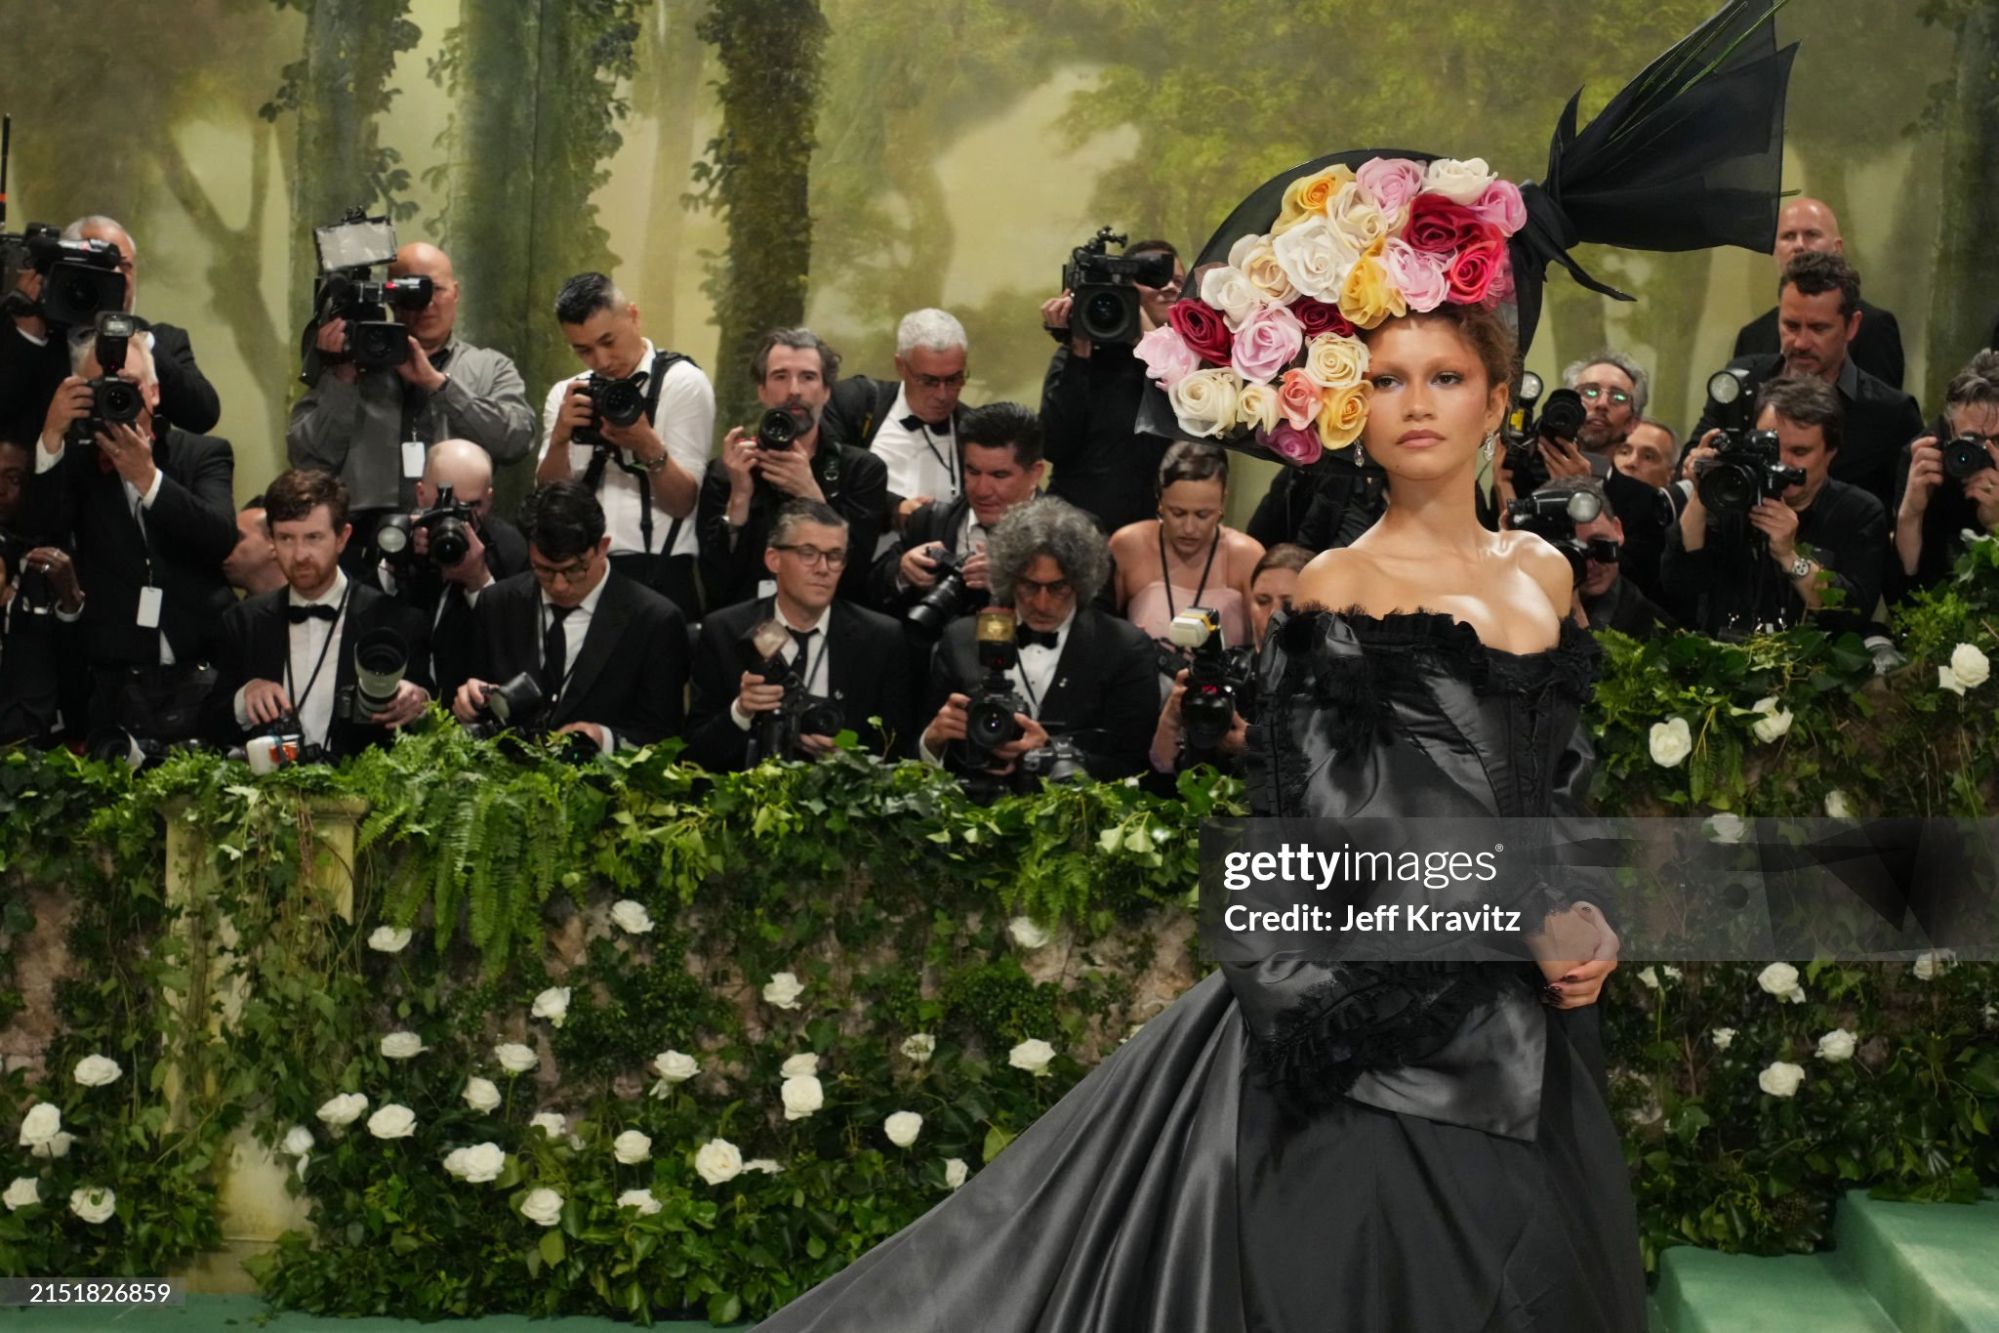 gettyimages-2151826859-2048x2048.jpg